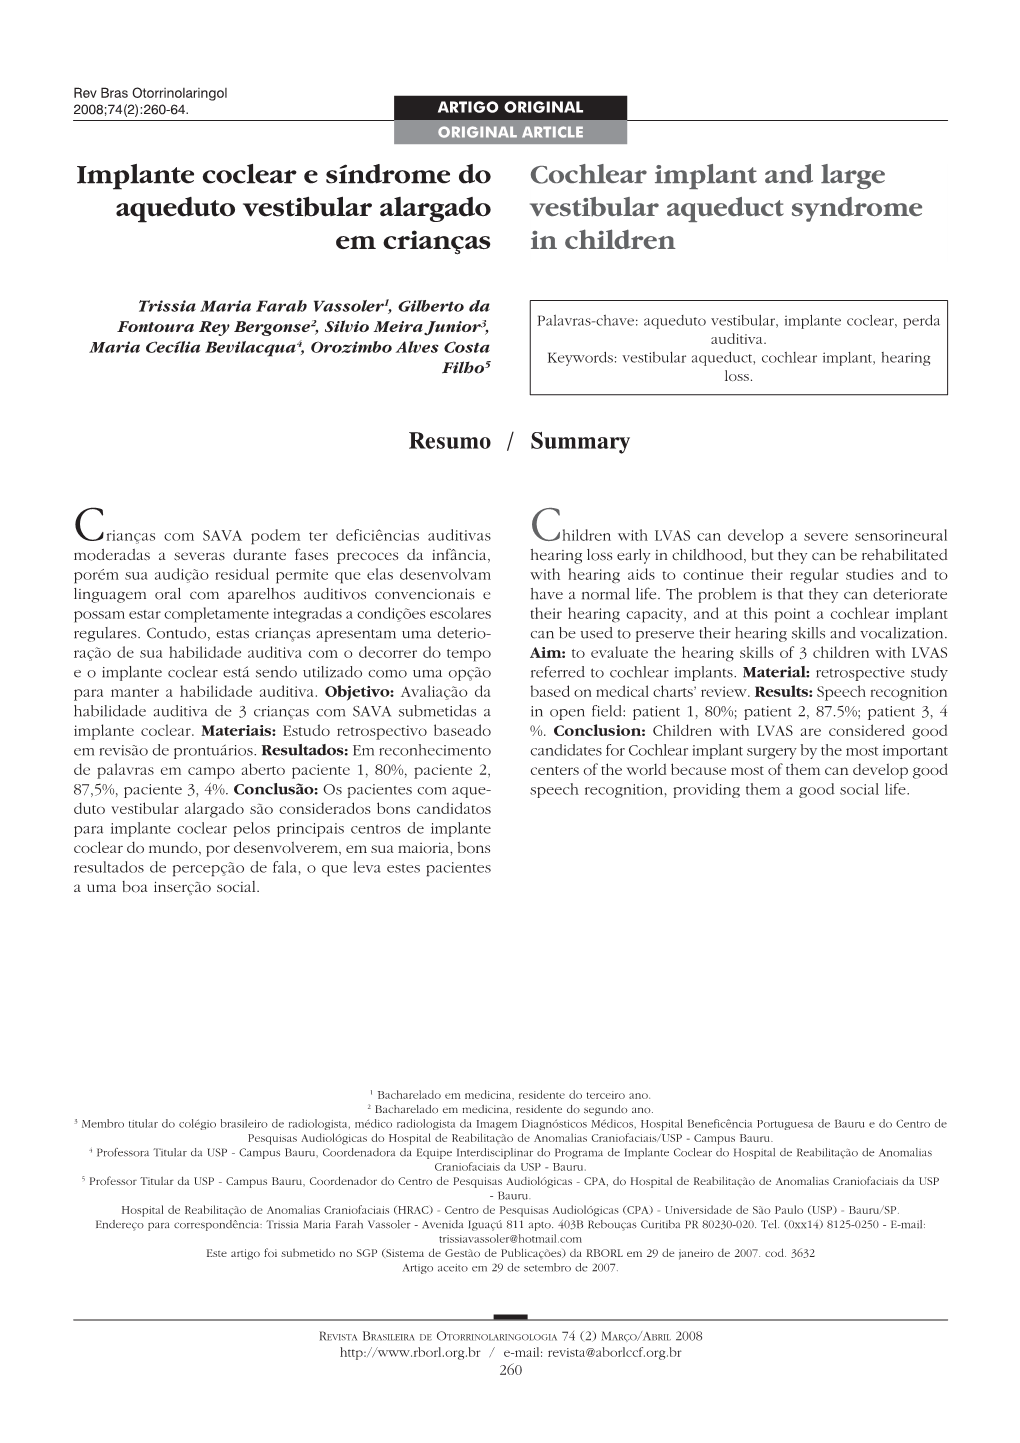 Cochlear Implant and Large Vestibular Aqueduct Syndrome in Children